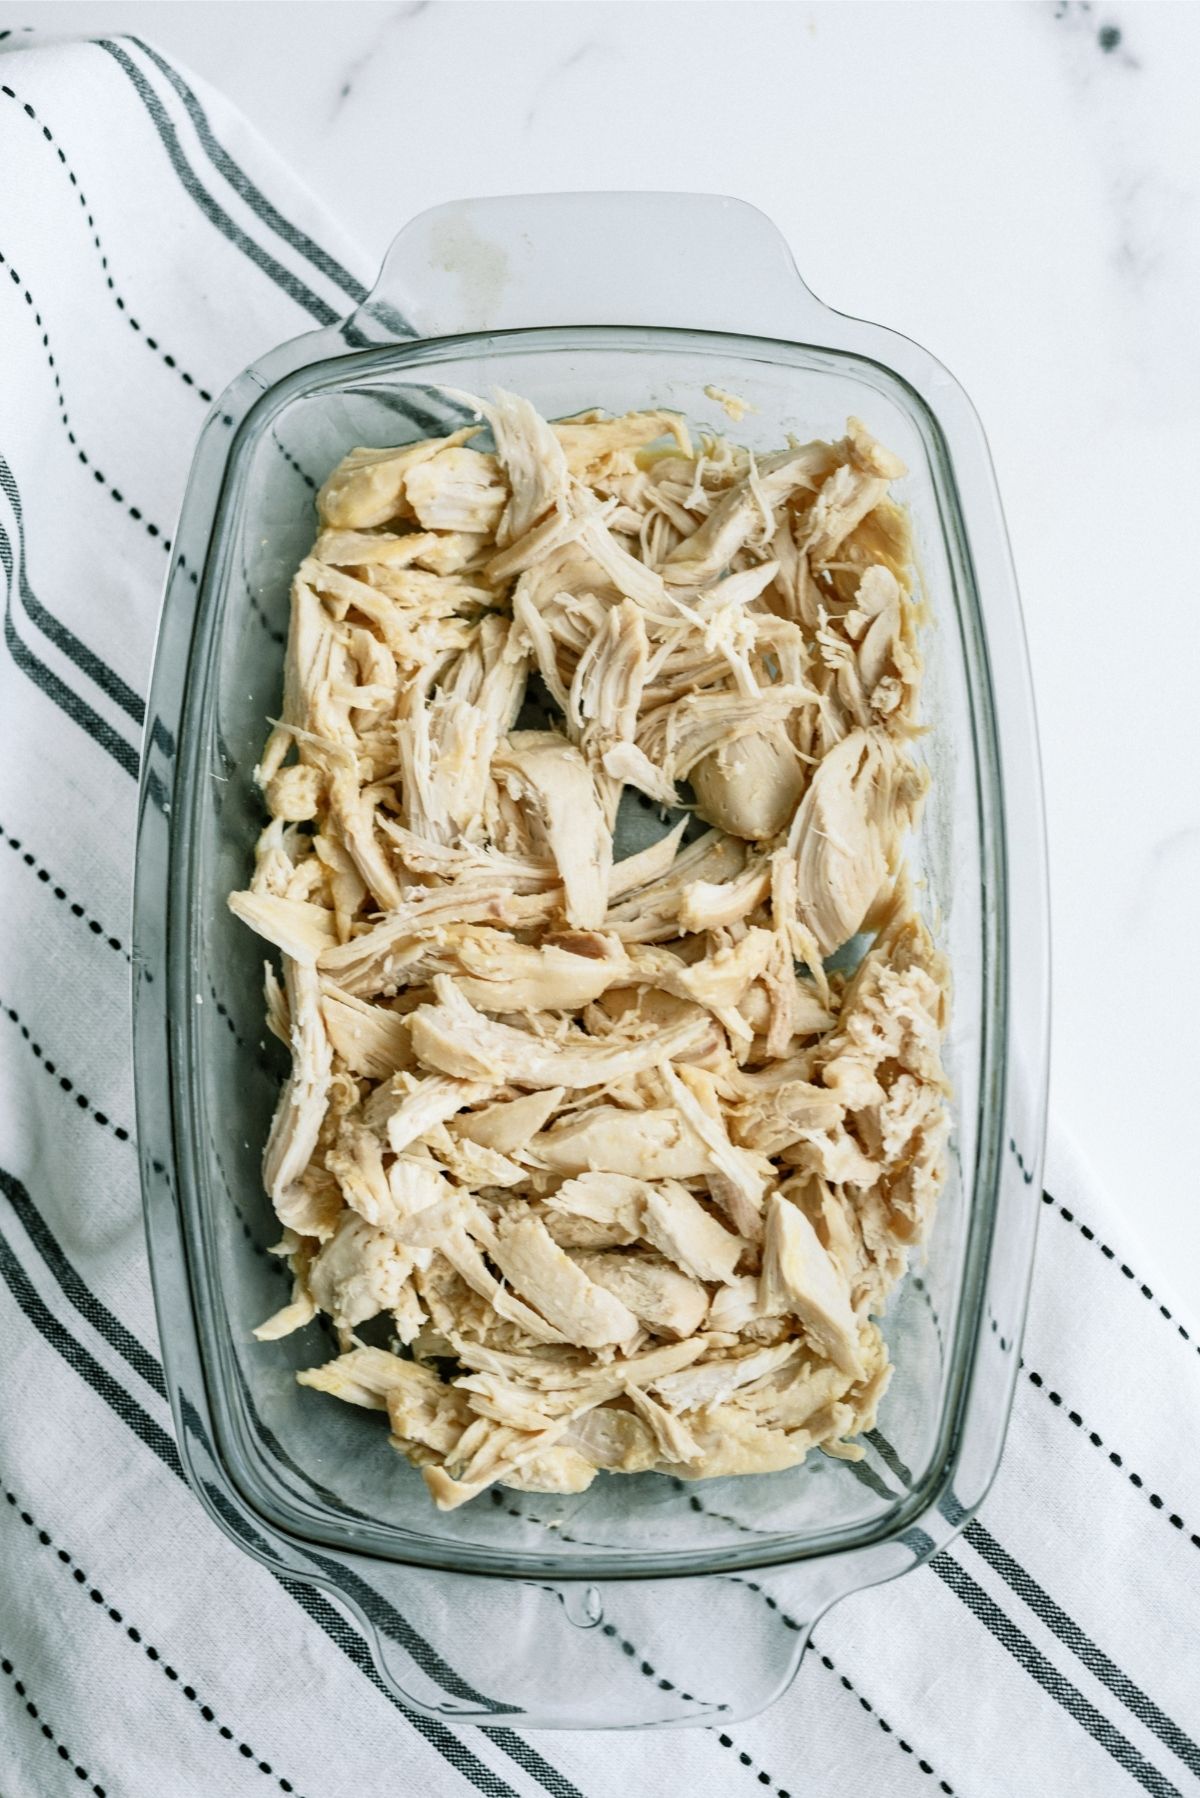 Shredded cooked chicken in a 9x13 glass dish